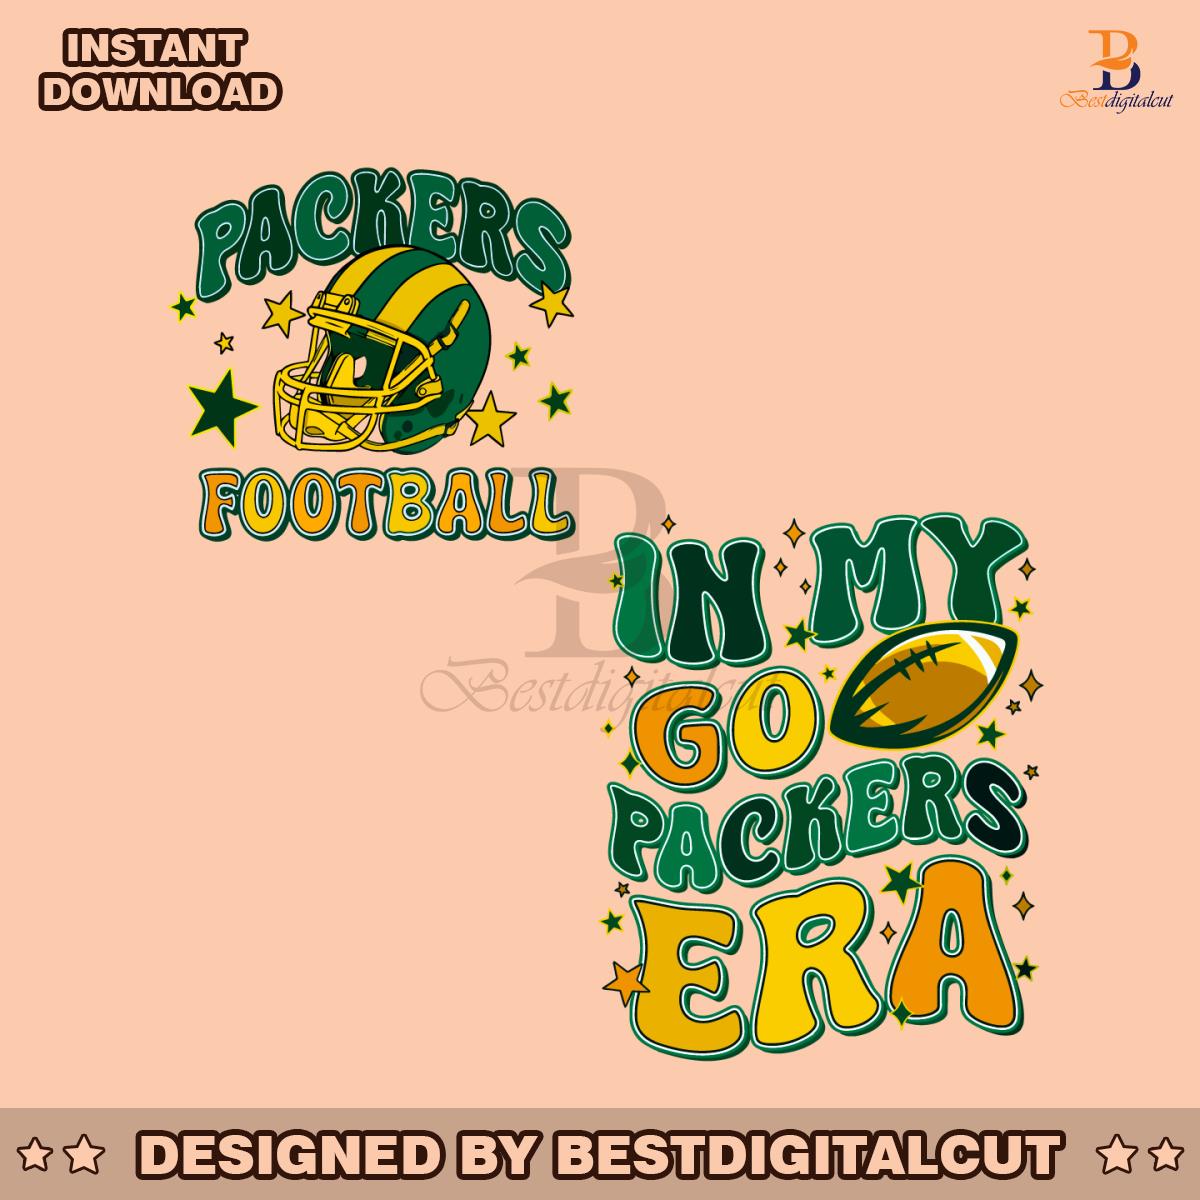 in-my-go-packers-era-nfl-football-svg